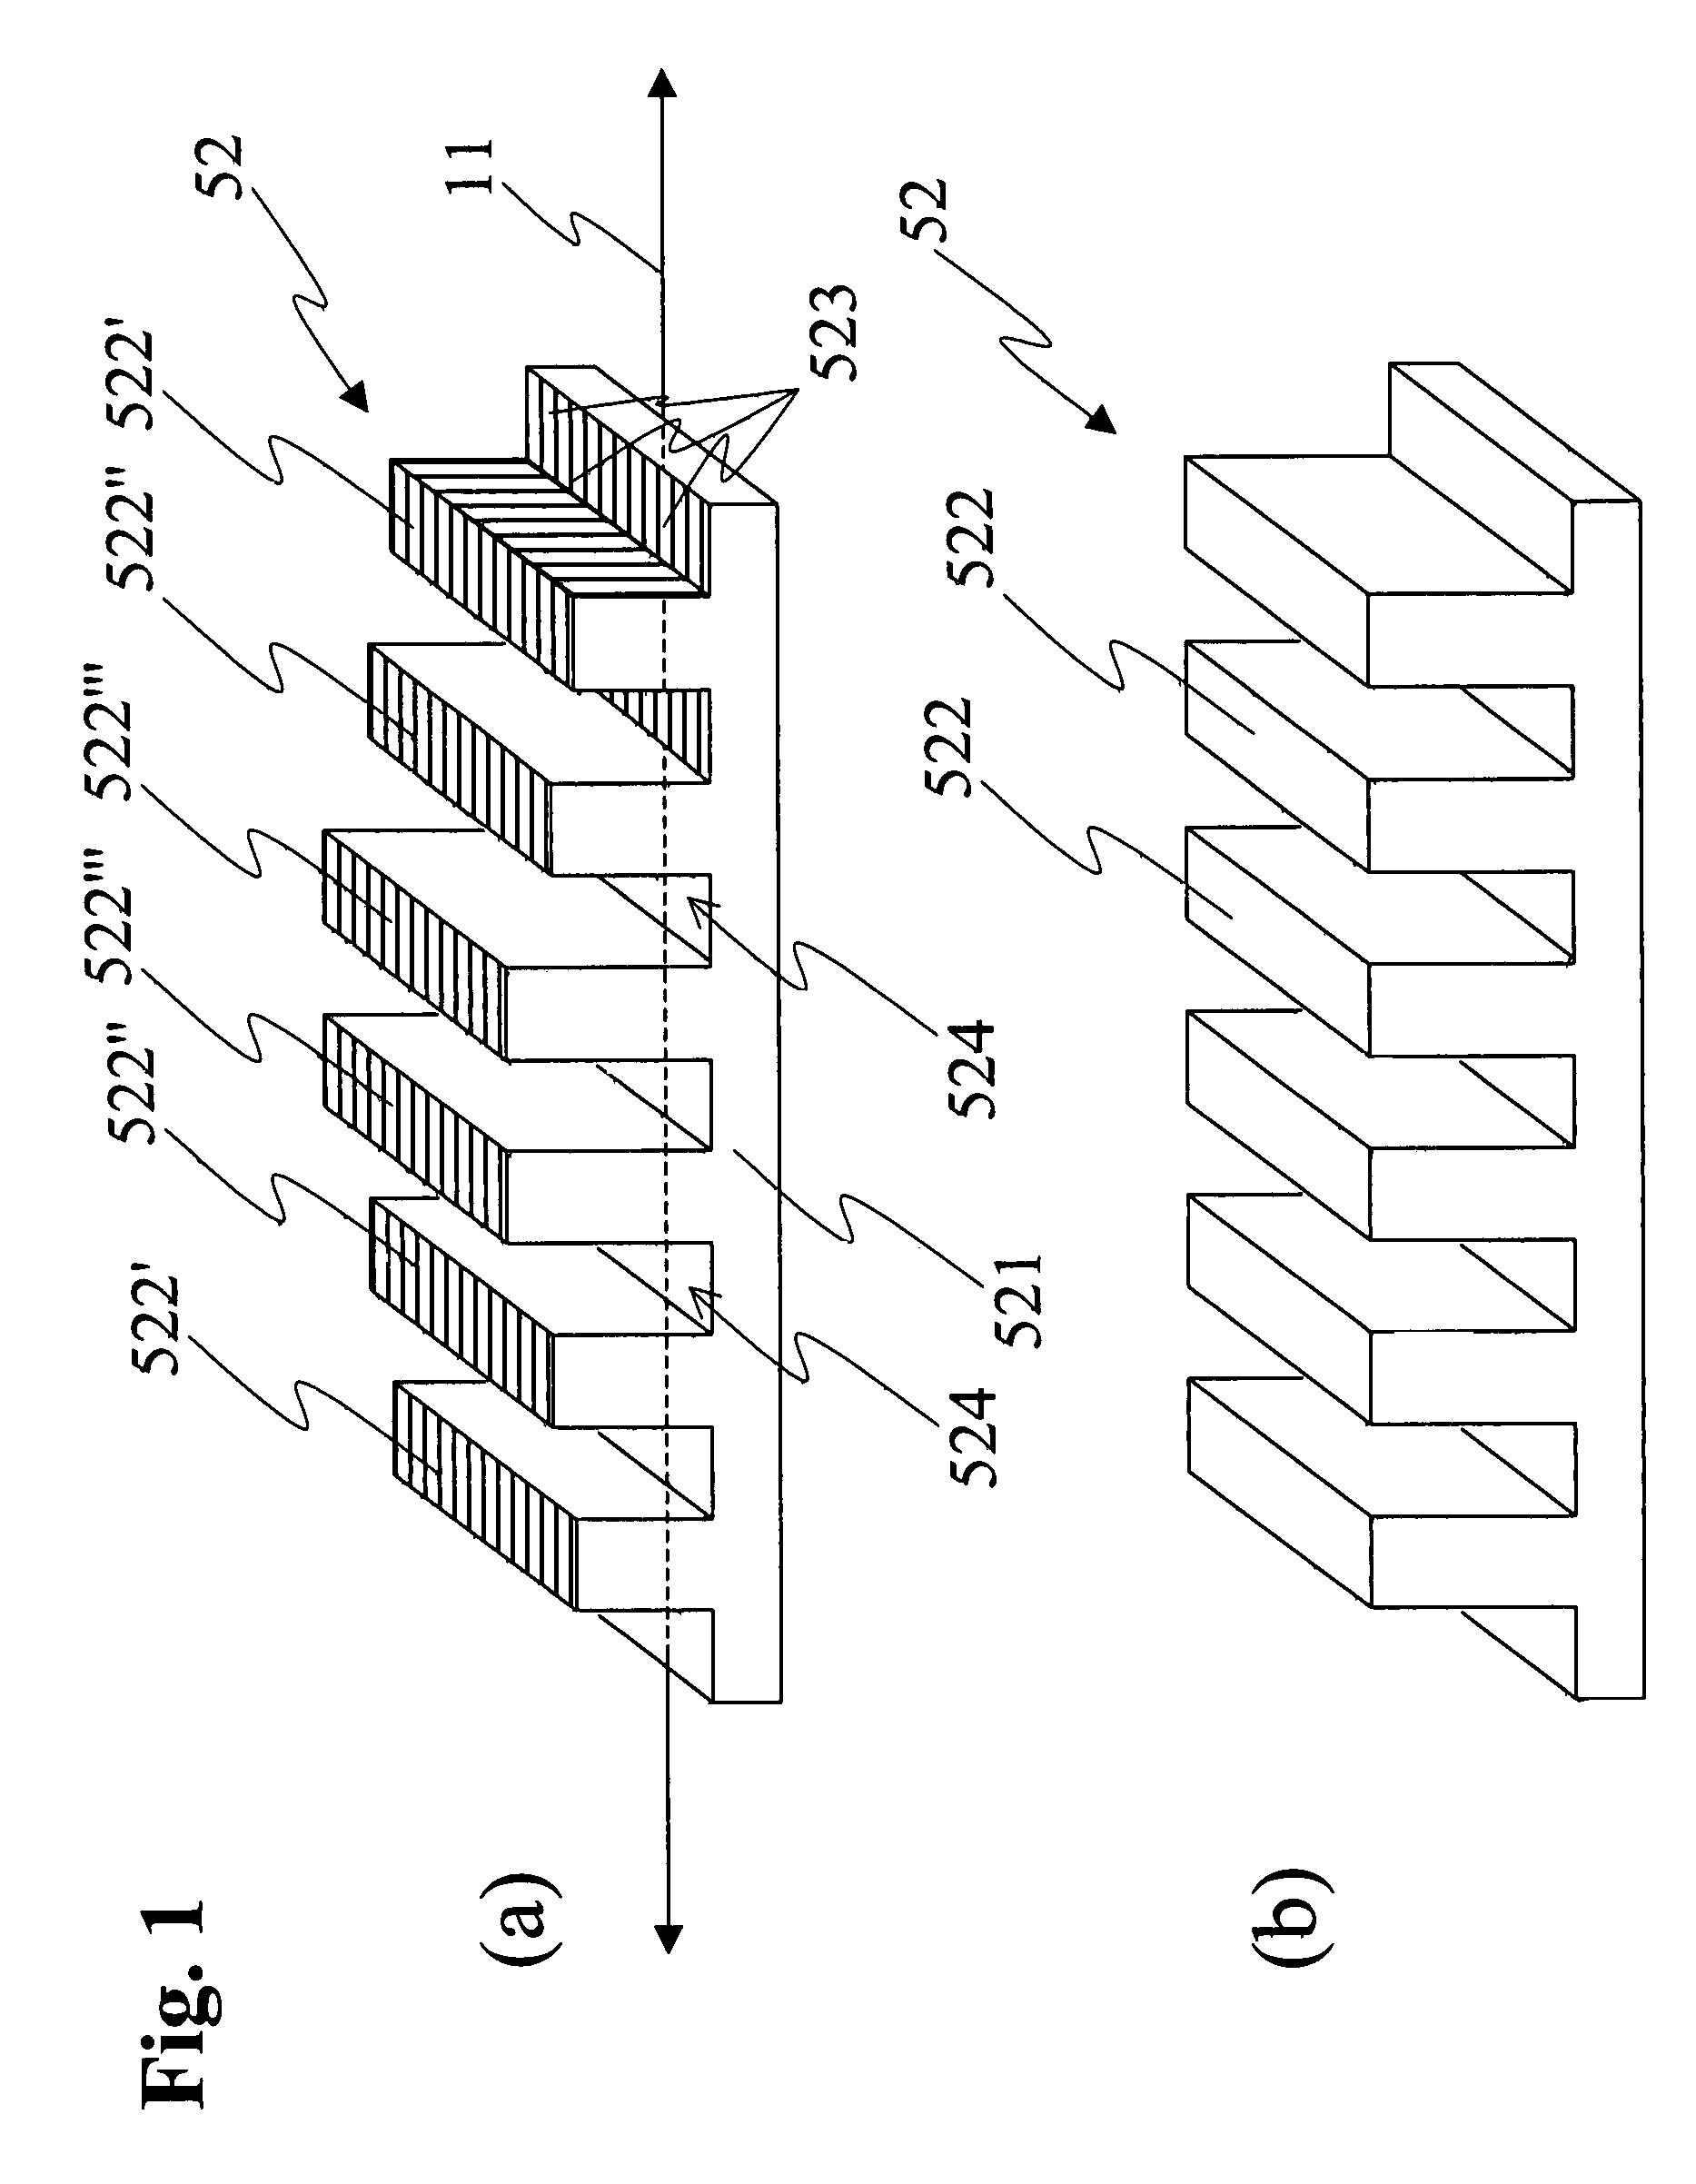 Iron core linear motor having low detent force with high power density